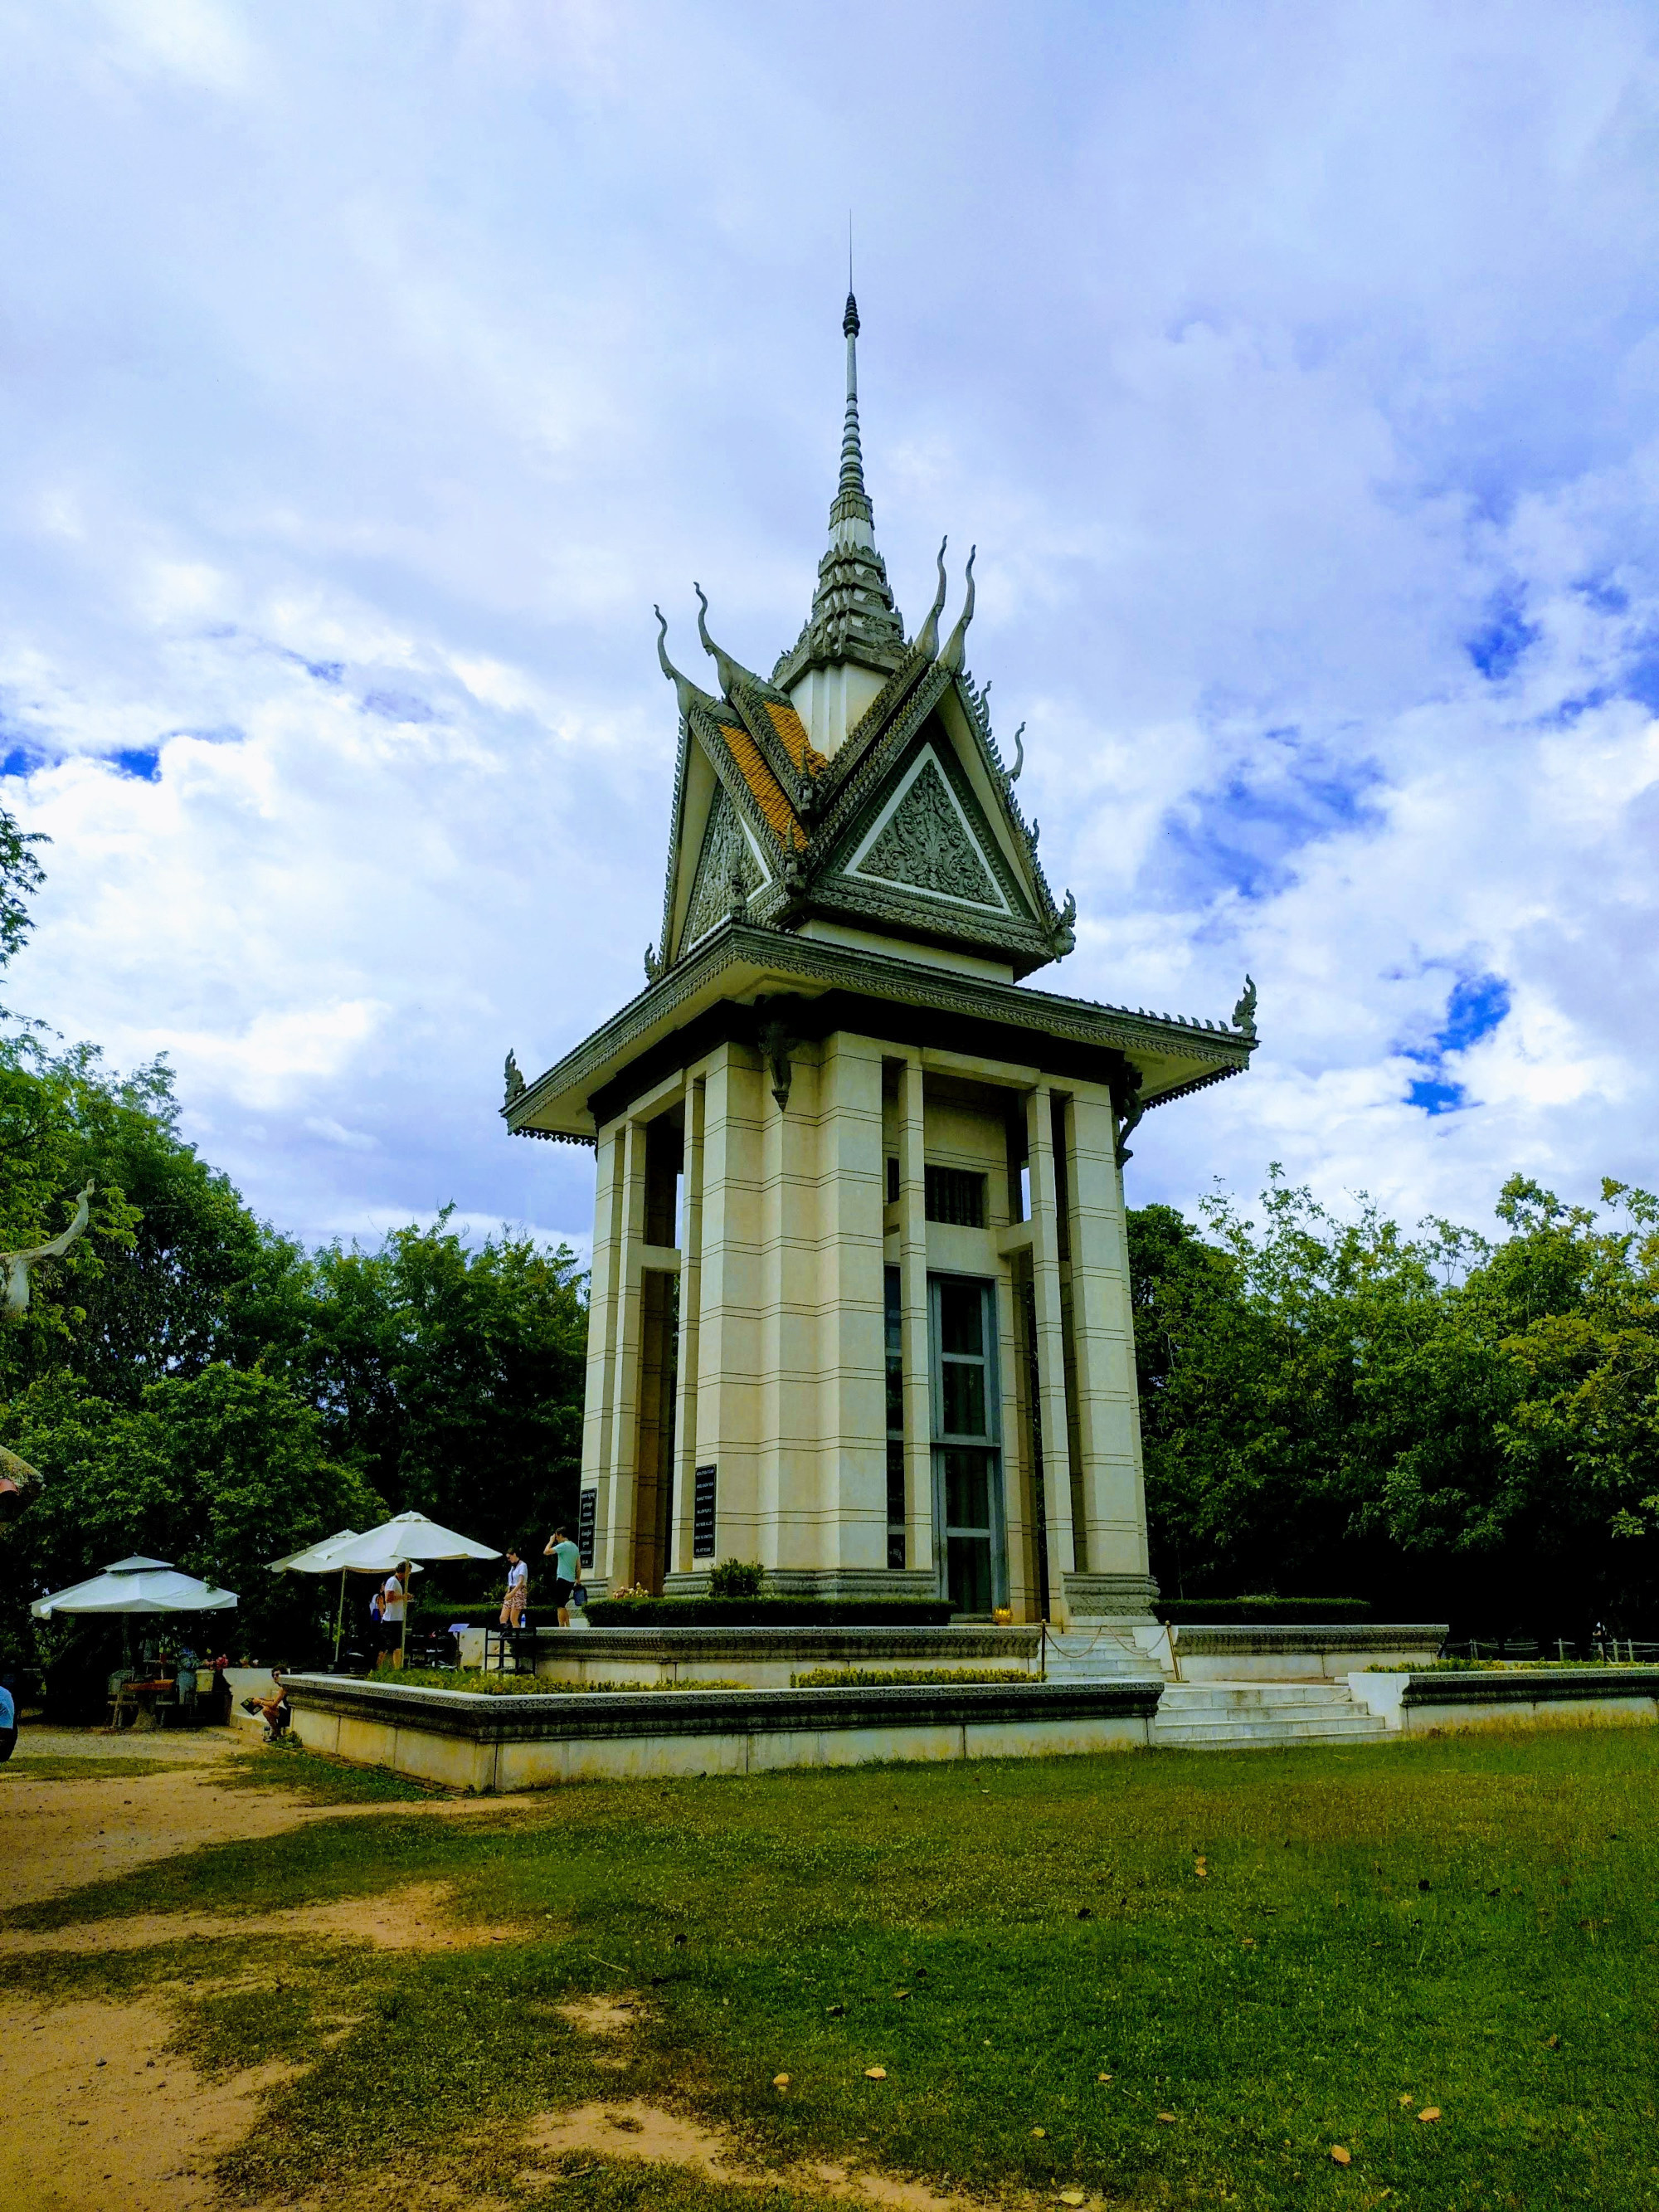 The Killing Fields (Phnom Penh, Cambodia) was a site of genocide during the Pol Pot regime.<br/> <br/>
This is a place of sorrow.<br/>
But, it is important for people to visit such places. To remember what dictatorial regimes lead to.